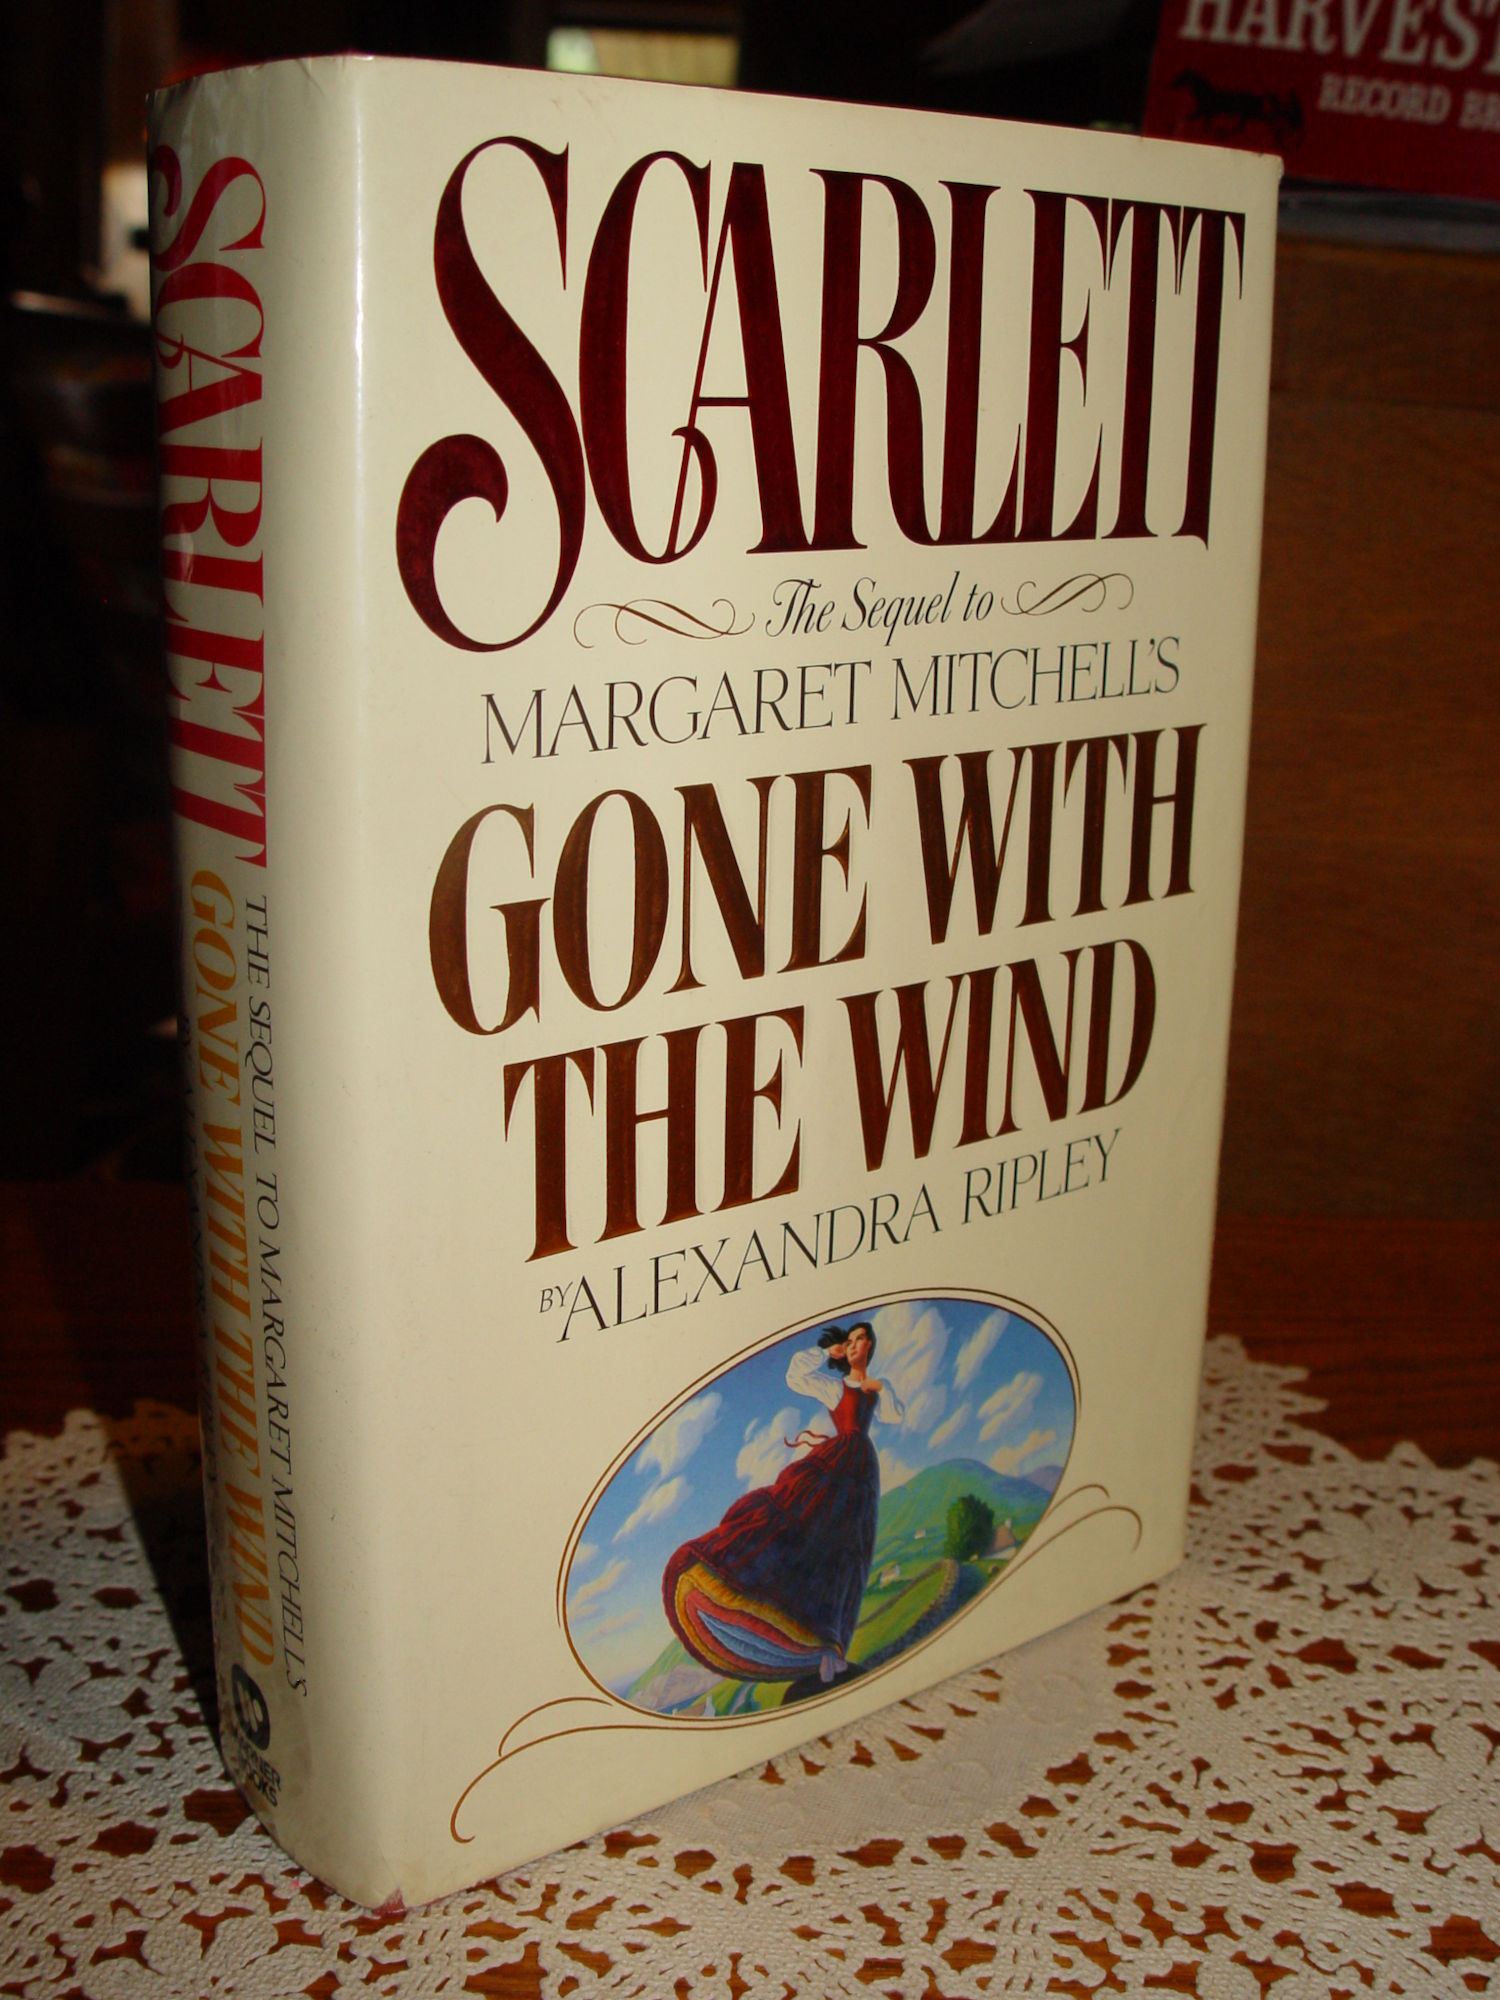 Scarlett: The
                        Sequel to Margaret Mitchell's "Gone With
                        the Wind" 1991 A. Ripley